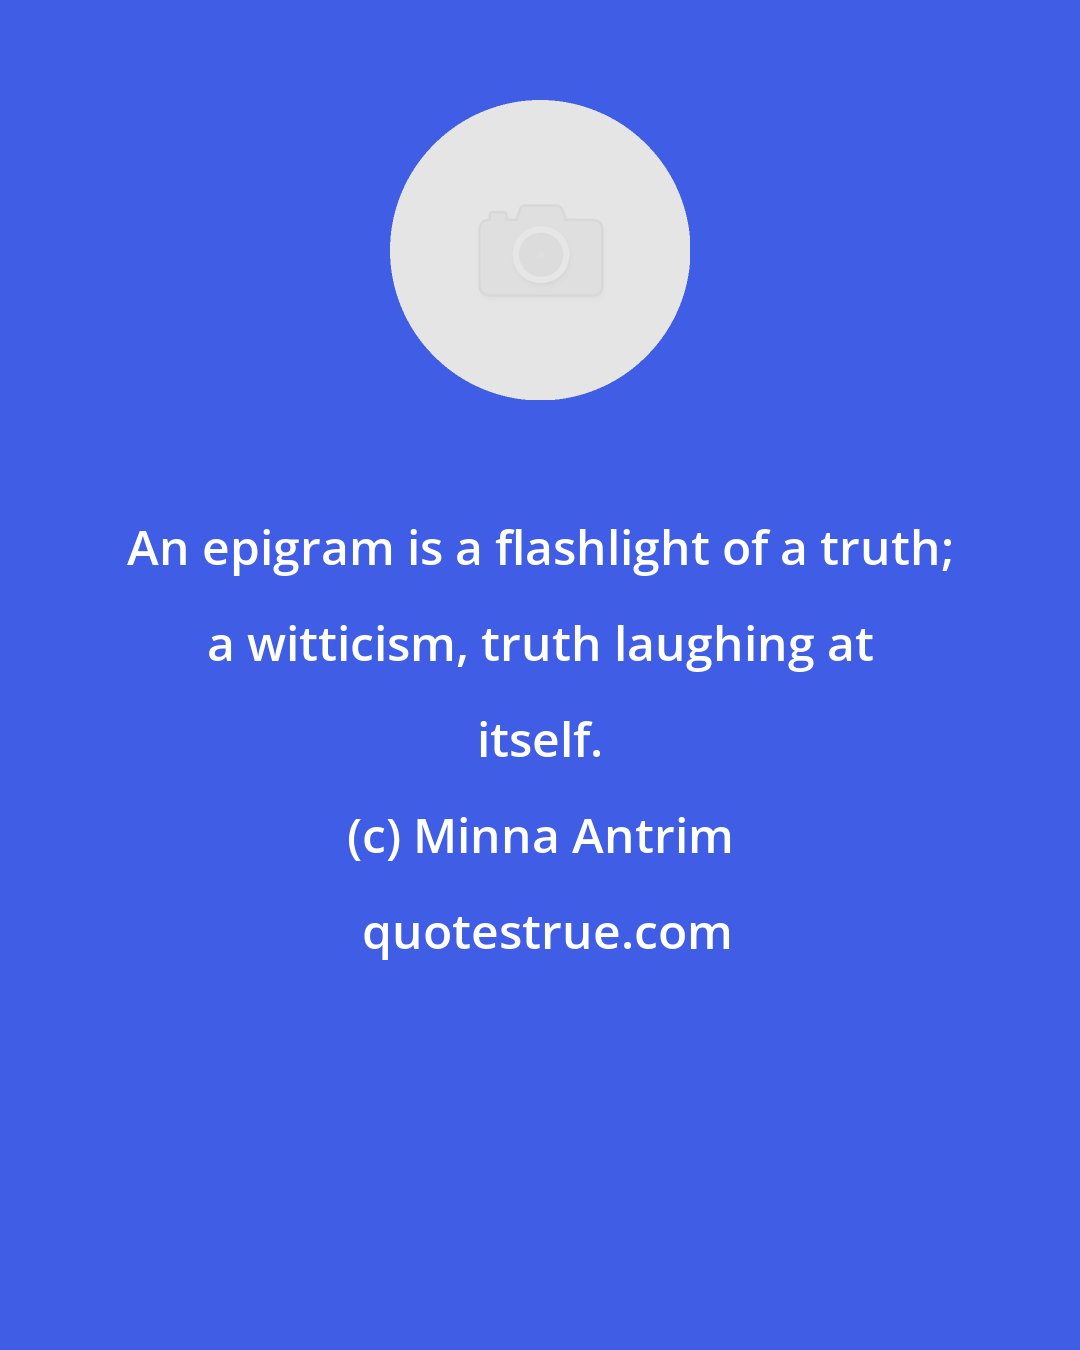 Minna Antrim: An epigram is a flashlight of a truth; a witticism, truth laughing at itself.